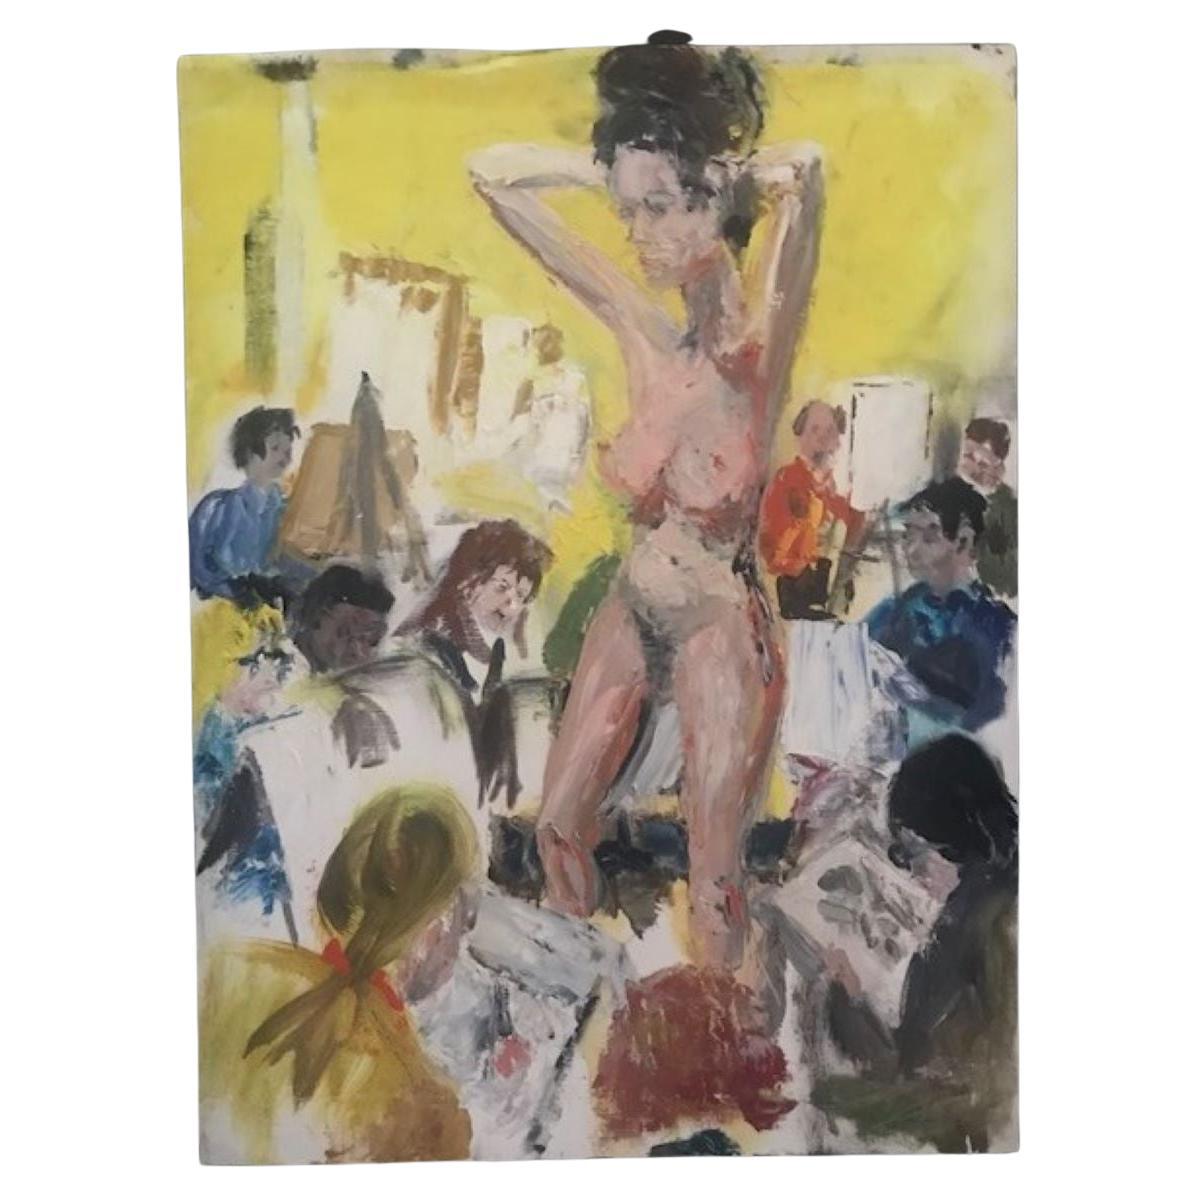 Painting on Canvas- Nude Model in Art Class